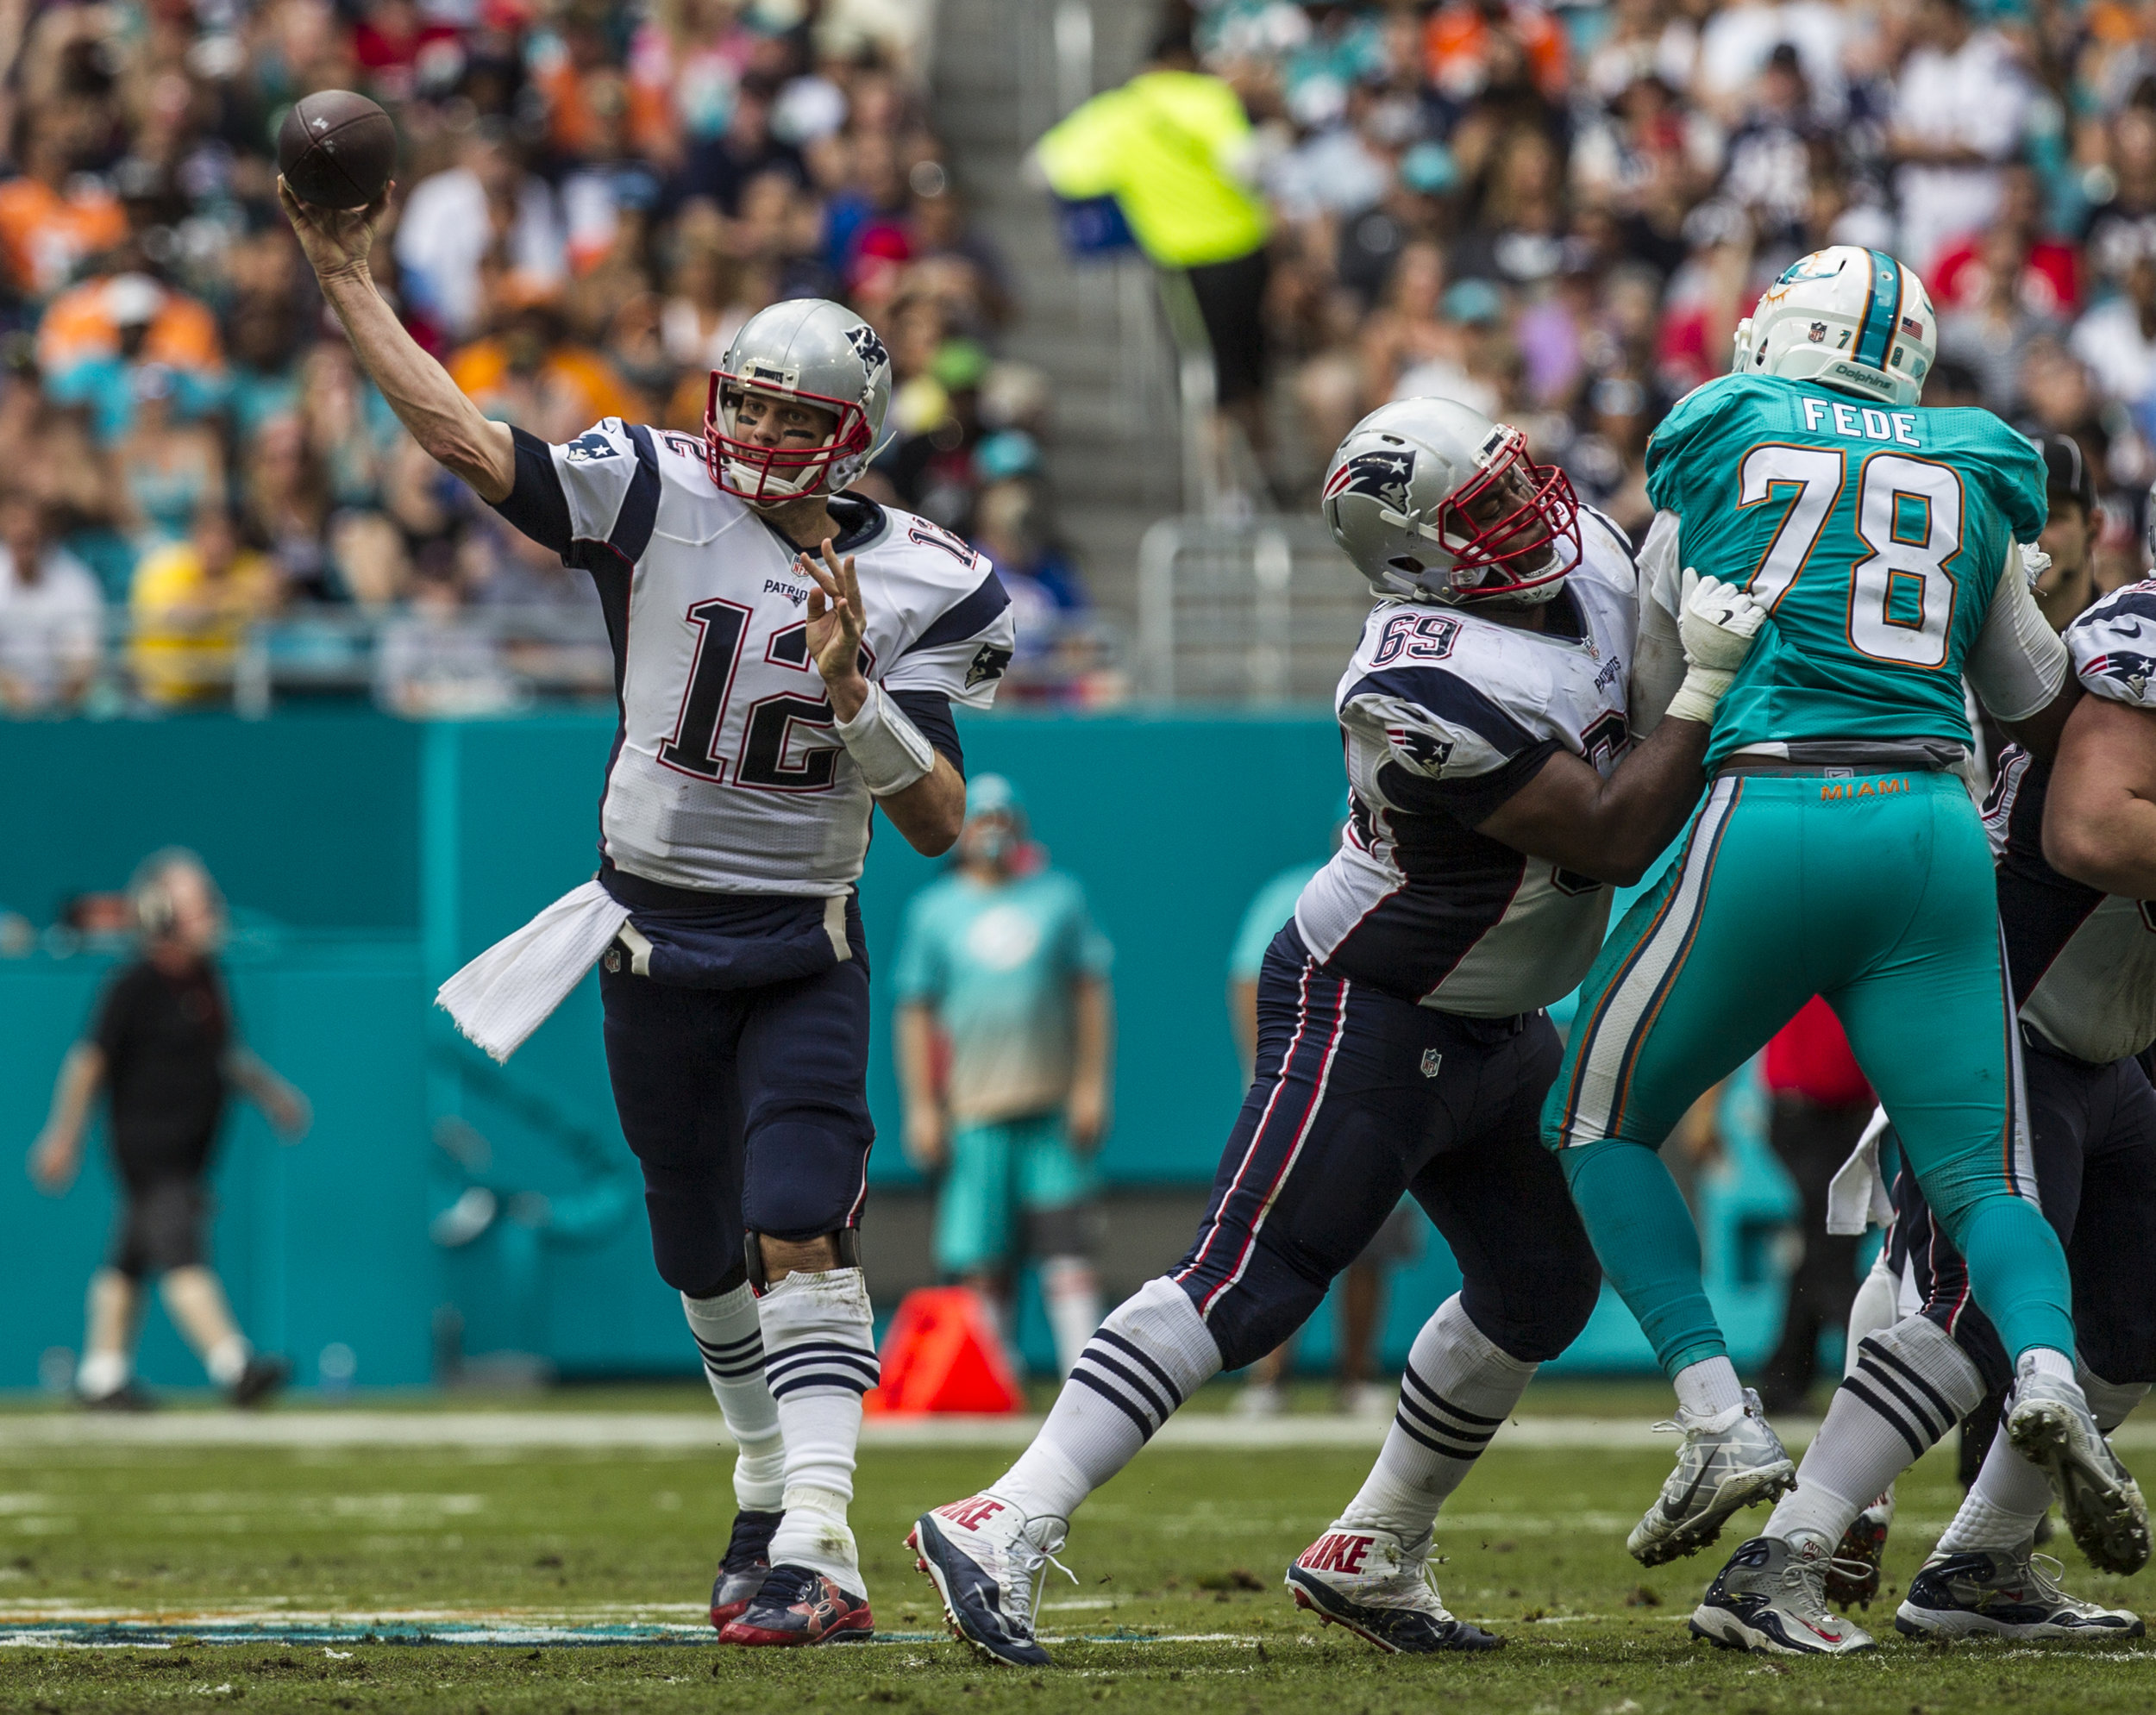  New England Patriots quarterback Tom Brady (12) attempts to complete a pass at Hard Rock Stadium in Miami Gardens, Florida, January 1, 2017. Brady finished with 273 yards and 3 touchdowns in the 35-14 win over the Dolphins. 